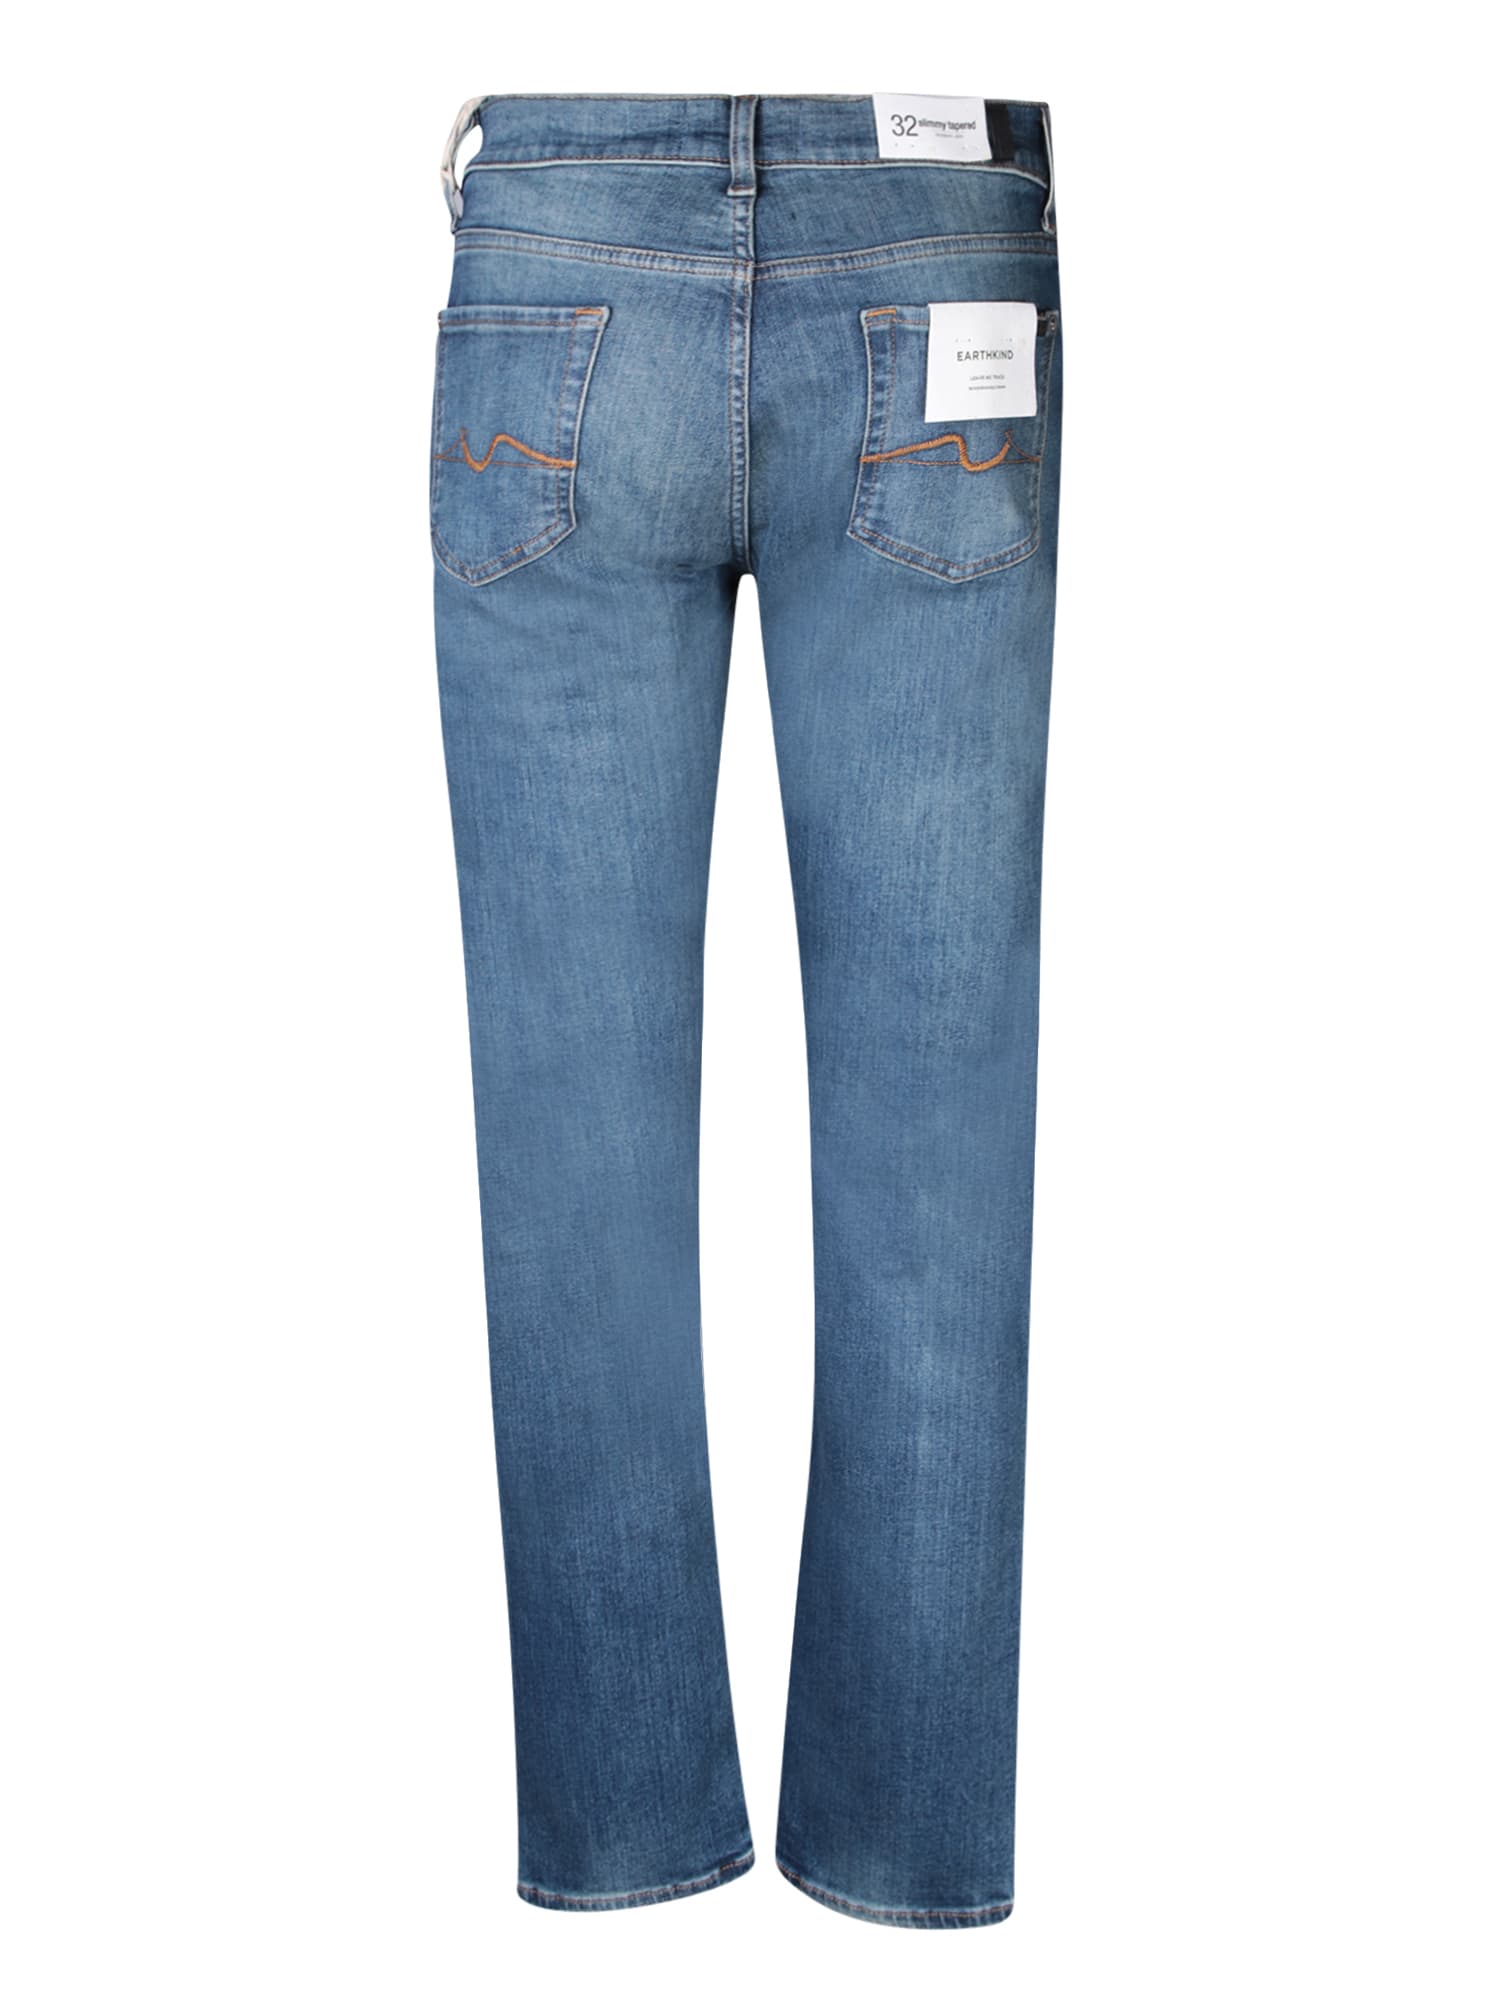 Shop 7 For All Mankind Slimmy Tapered Blue Jeans